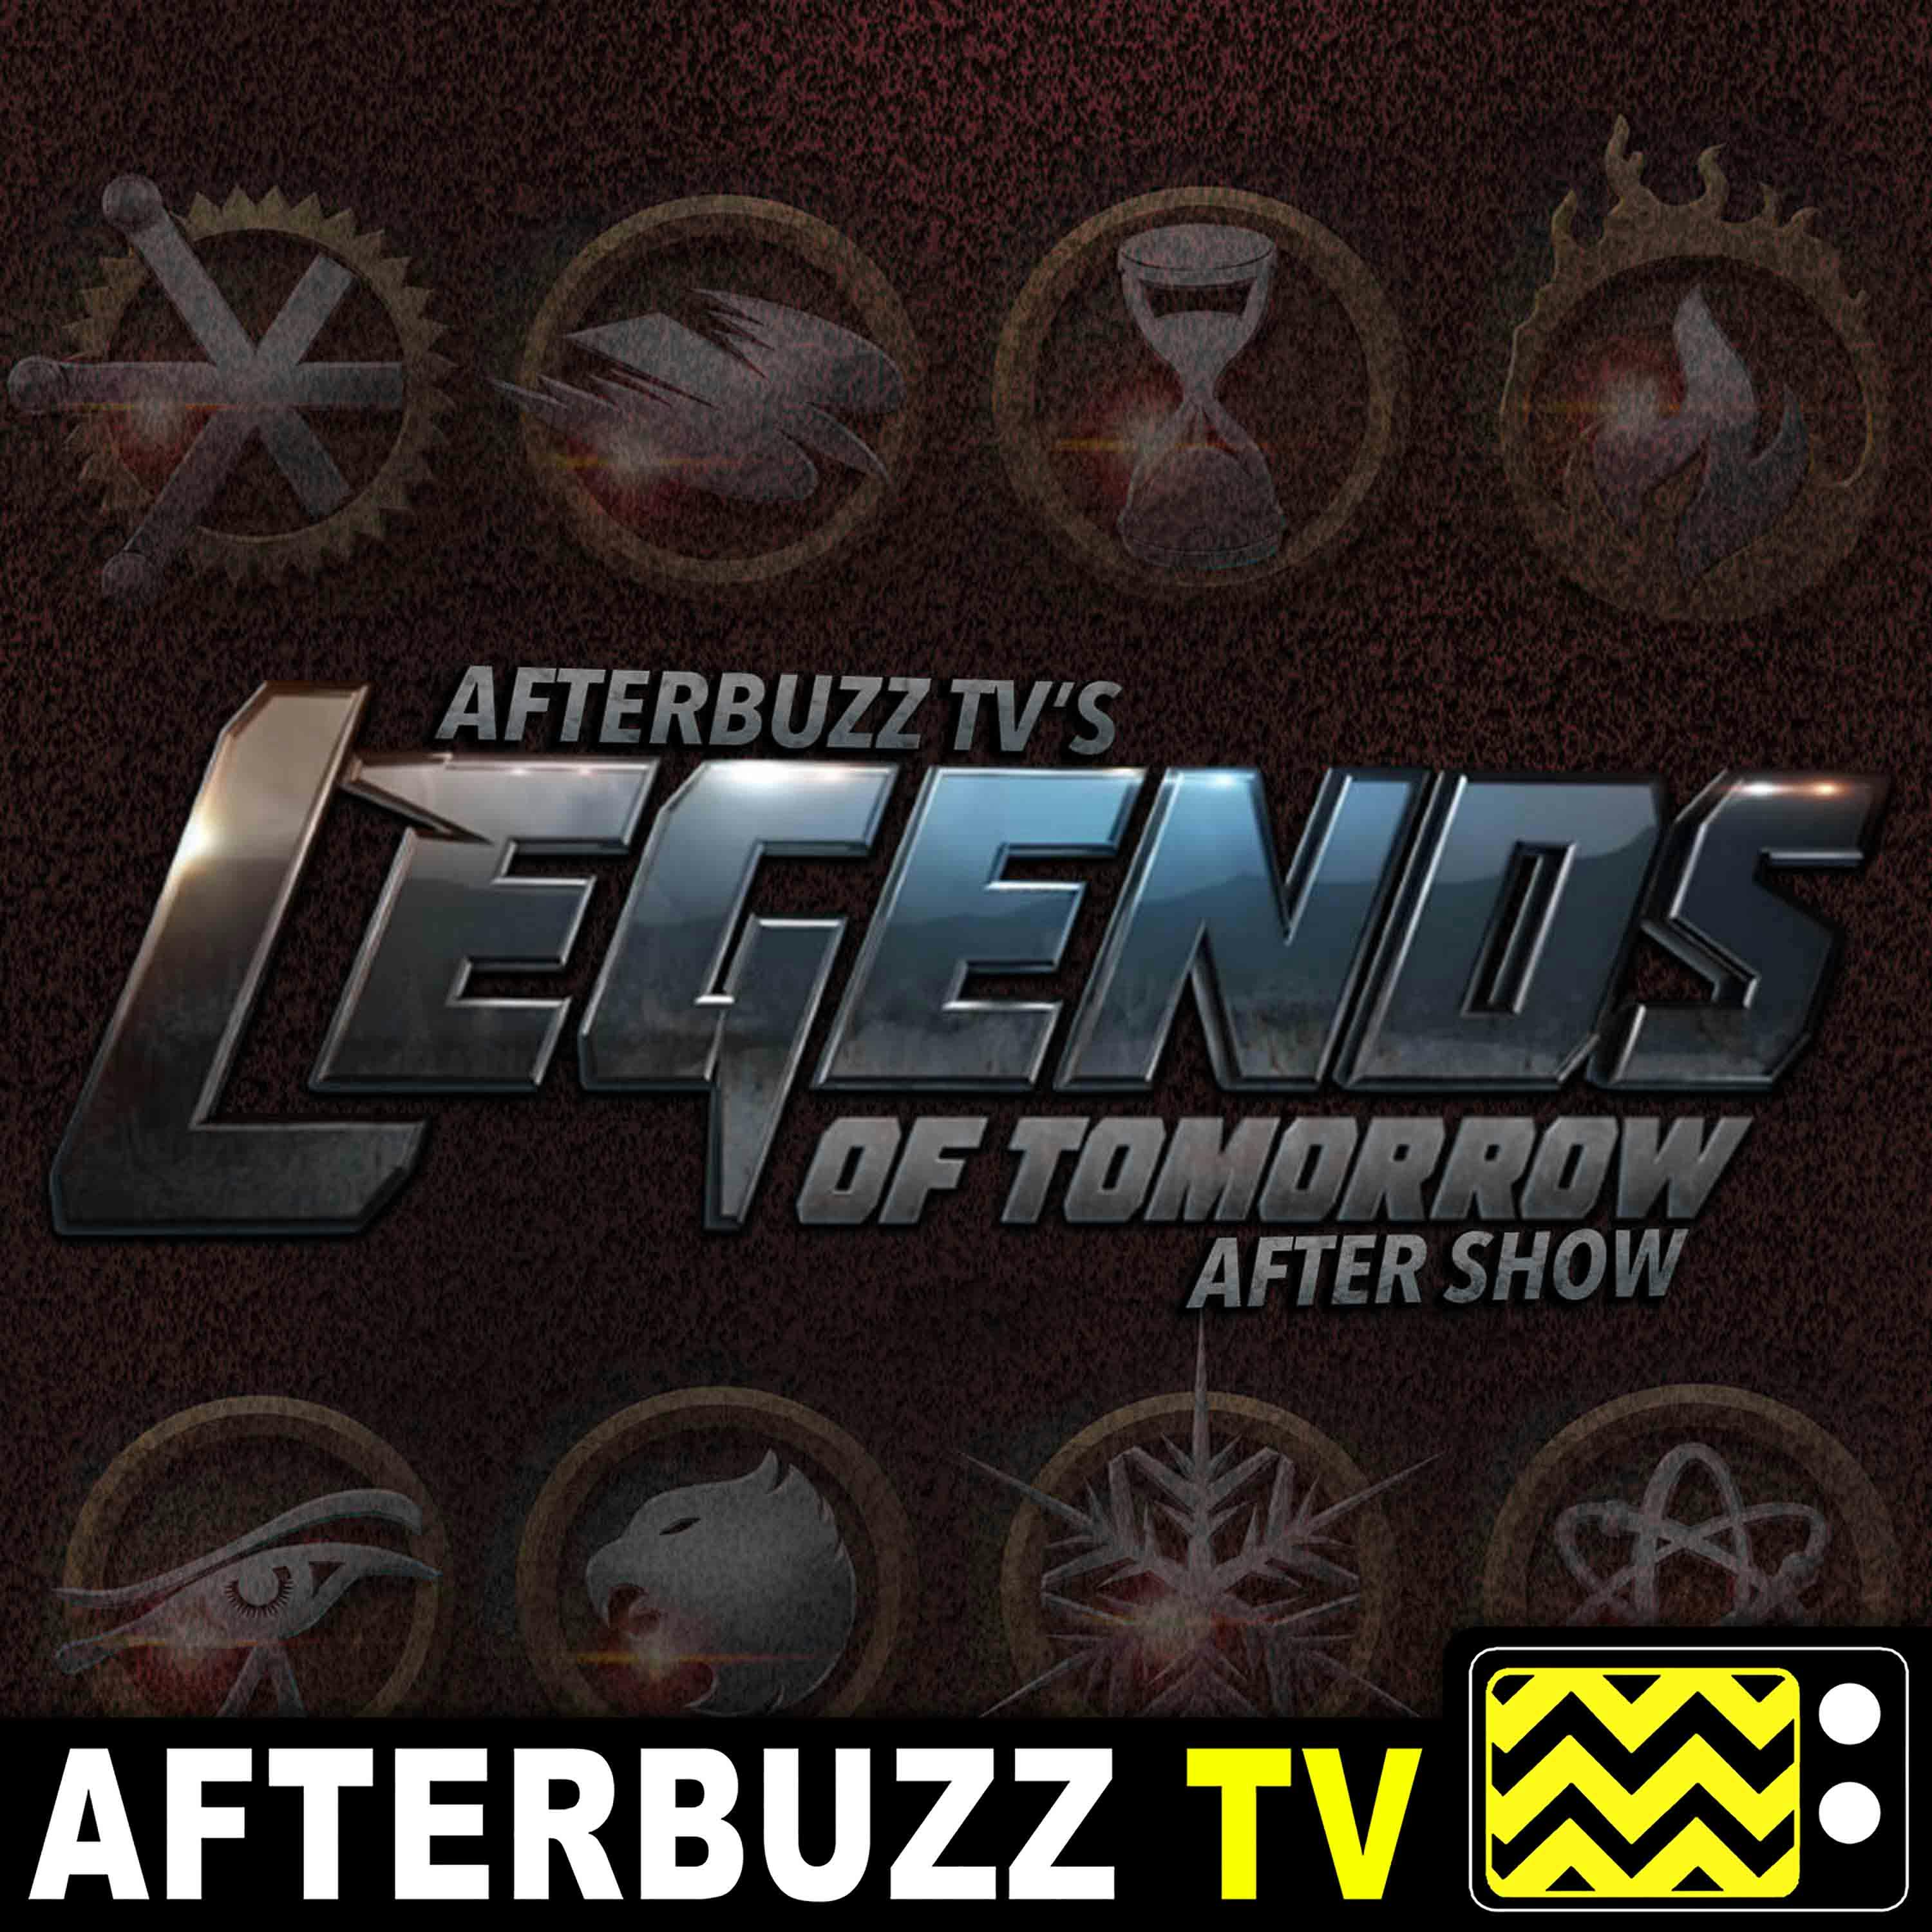 Legends Of Tomorrow S:3 | Return Of The Mack E:5 | AfterBuzz TV AfterShow